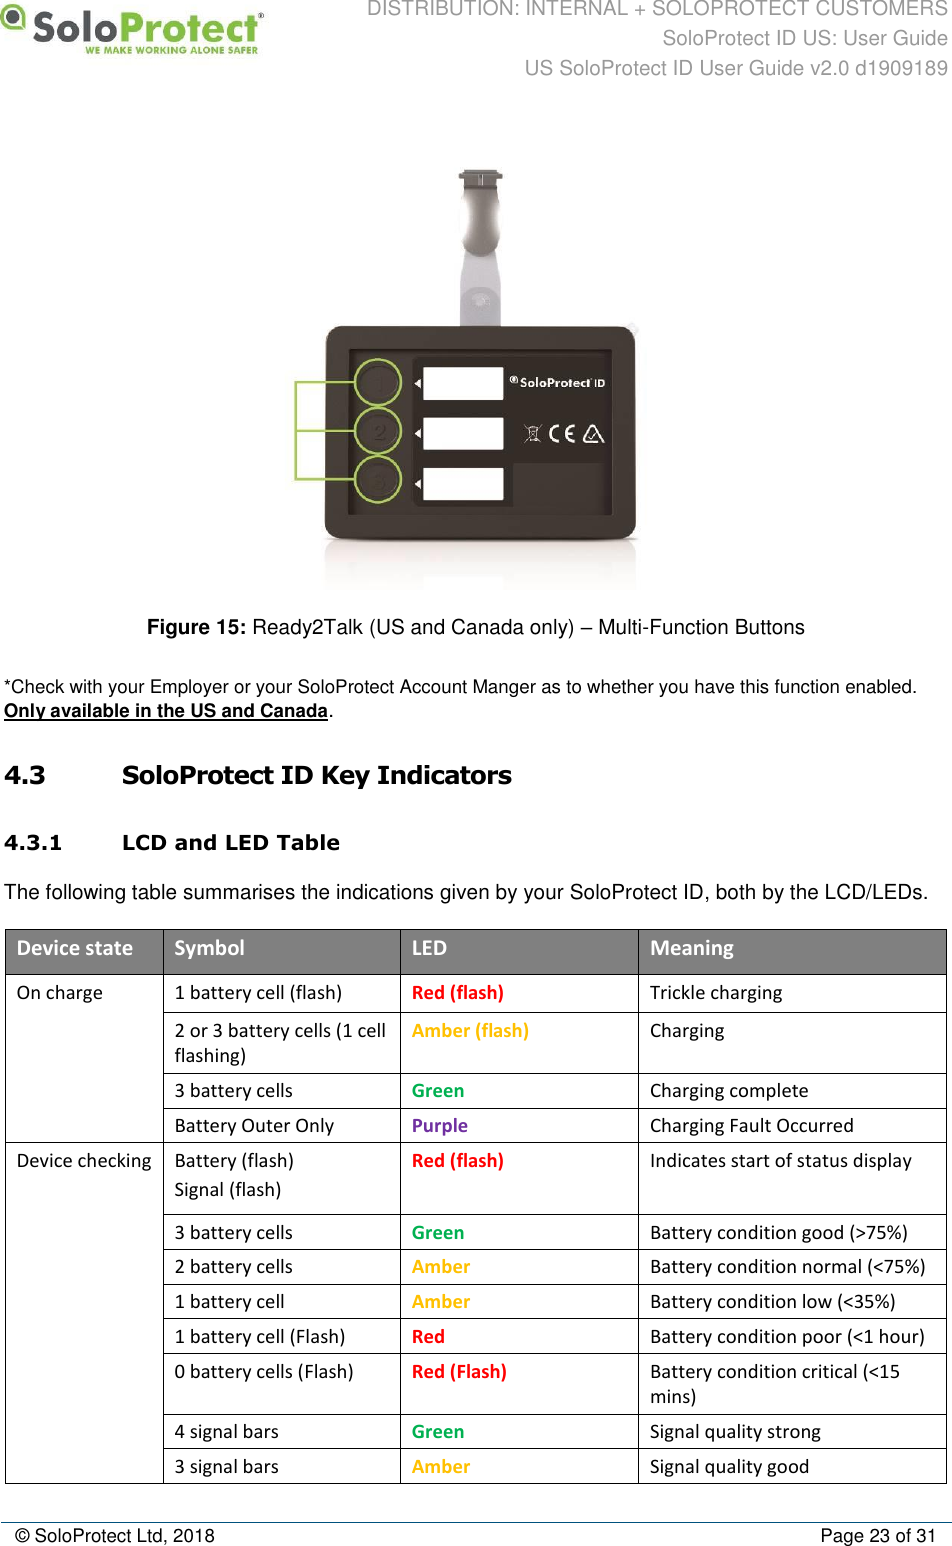 DISTRIBUTION: INTERNAL + SOLOPROTECT CUSTOMERS SoloProtect ID US: User Guide US SoloProtect ID User Guide v2.0 d1909189  © SoloProtect Ltd, 2018  Page 23 of 31  Figure 15: Ready2Talk (US and Canada only) – Multi-Function Buttons *Check with your Employer or your SoloProtect Account Manger as to whether you have this function enabled.  Only available in the US and Canada. 4.3 SoloProtect ID Key Indicators 4.3.1 LCD and LED Table The following table summarises the indications given by your SoloProtect ID, both by the LCD/LEDs. Device state Symbol LED Meaning On charge 1 battery cell (flash) Red (flash) Trickle charging 2 or 3 battery cells (1 cell flashing) Amber (flash) Charging 3 battery cells Green  Charging complete Battery Outer Only Purple Charging Fault Occurred Device checking Battery (flash) Signal (flash) Red (flash) Indicates start of status display 3 battery cells Green Battery condition good (&gt;75%) 2 battery cells Amber Battery condition normal (&lt;75%) 1 battery cell Amber Battery condition low (&lt;35%) 1 battery cell (Flash) Red Battery condition poor (&lt;1 hour) 0 battery cells (Flash) Red (Flash) Battery condition critical (&lt;15 mins) 4 signal bars Green Signal quality strong 3 signal bars Amber Signal quality good 